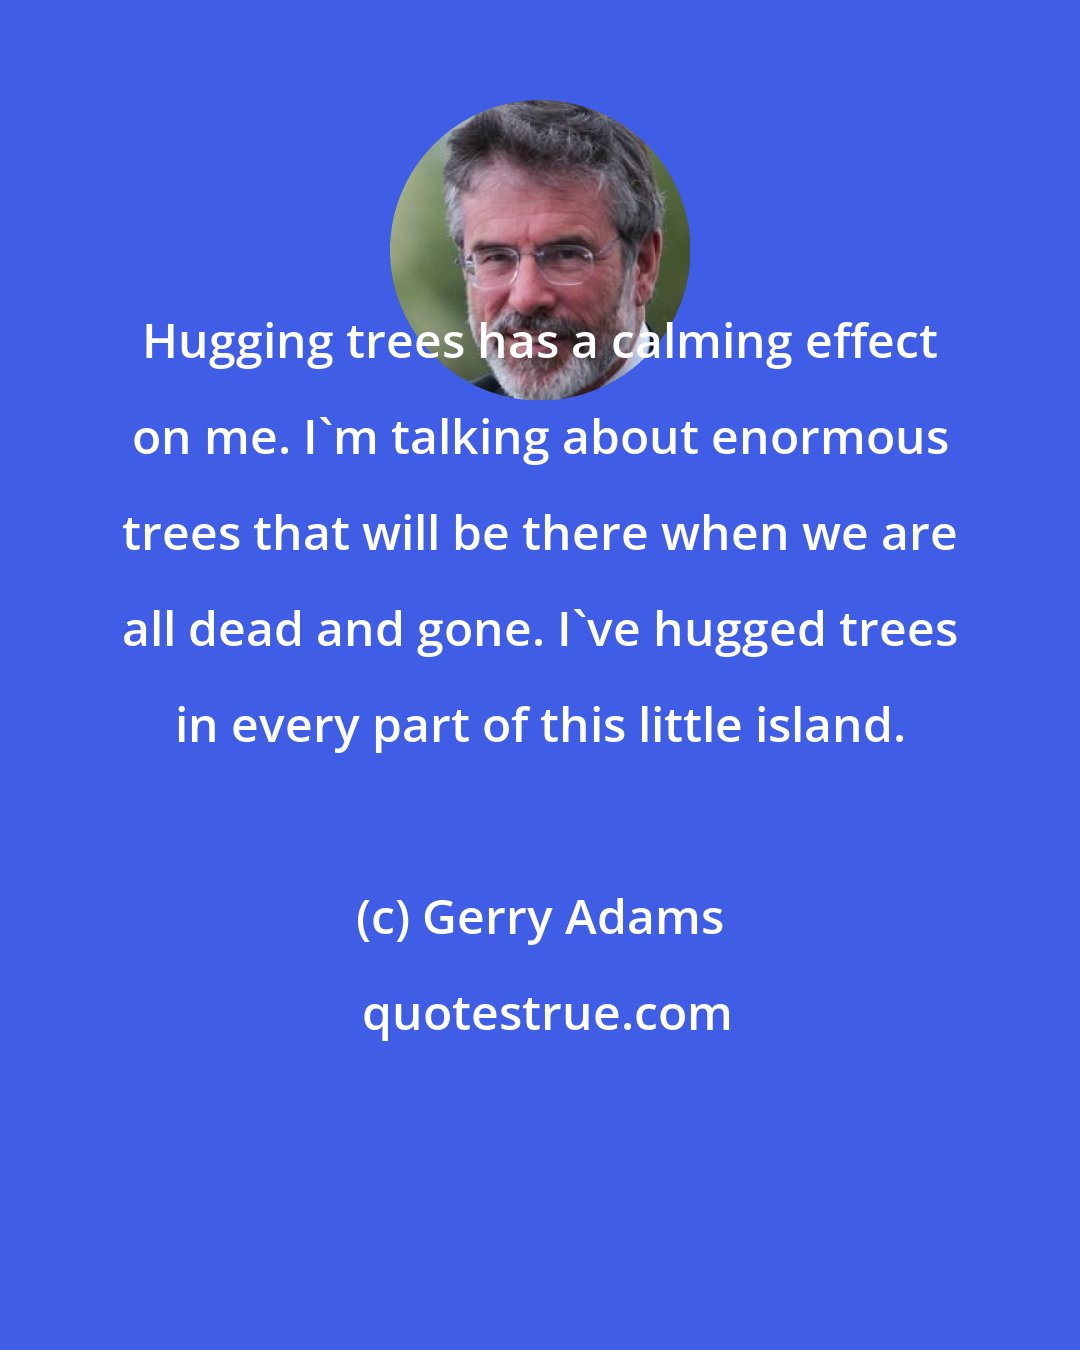 Gerry Adams: Hugging trees has a calming effect on me. I'm talking about enormous trees that will be there when we are all dead and gone. I've hugged trees in every part of this little island.